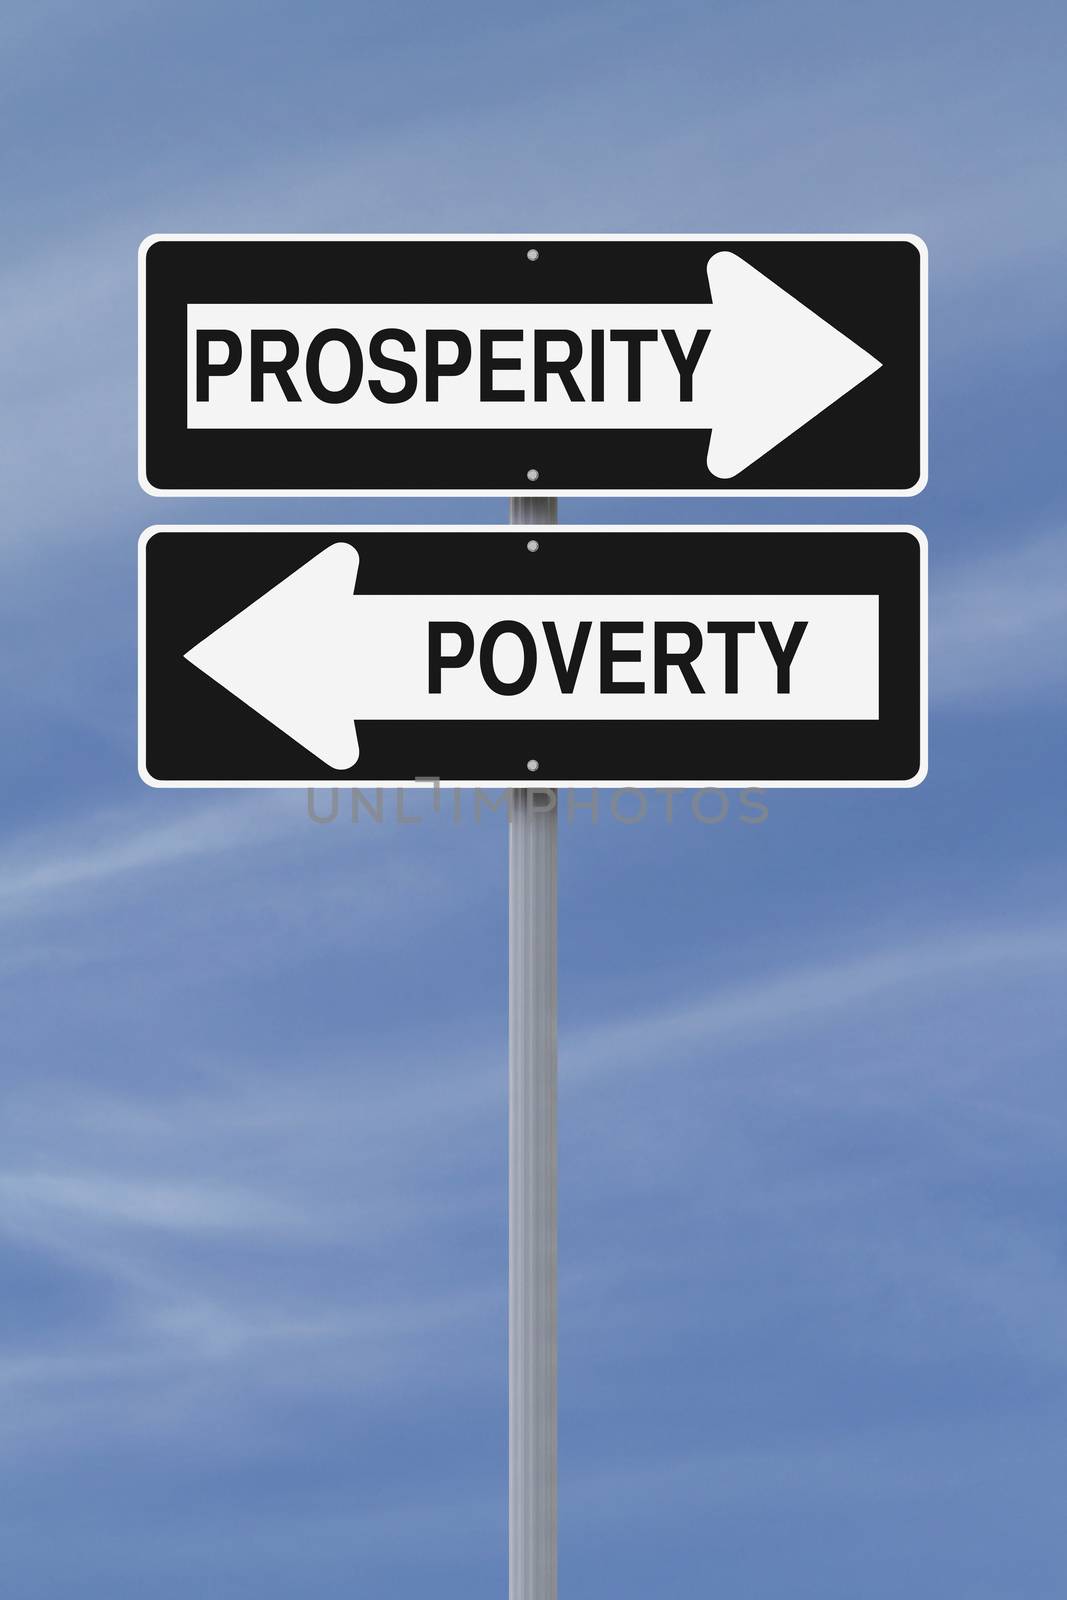 Conceptual one way street signs on prosperity and poverty